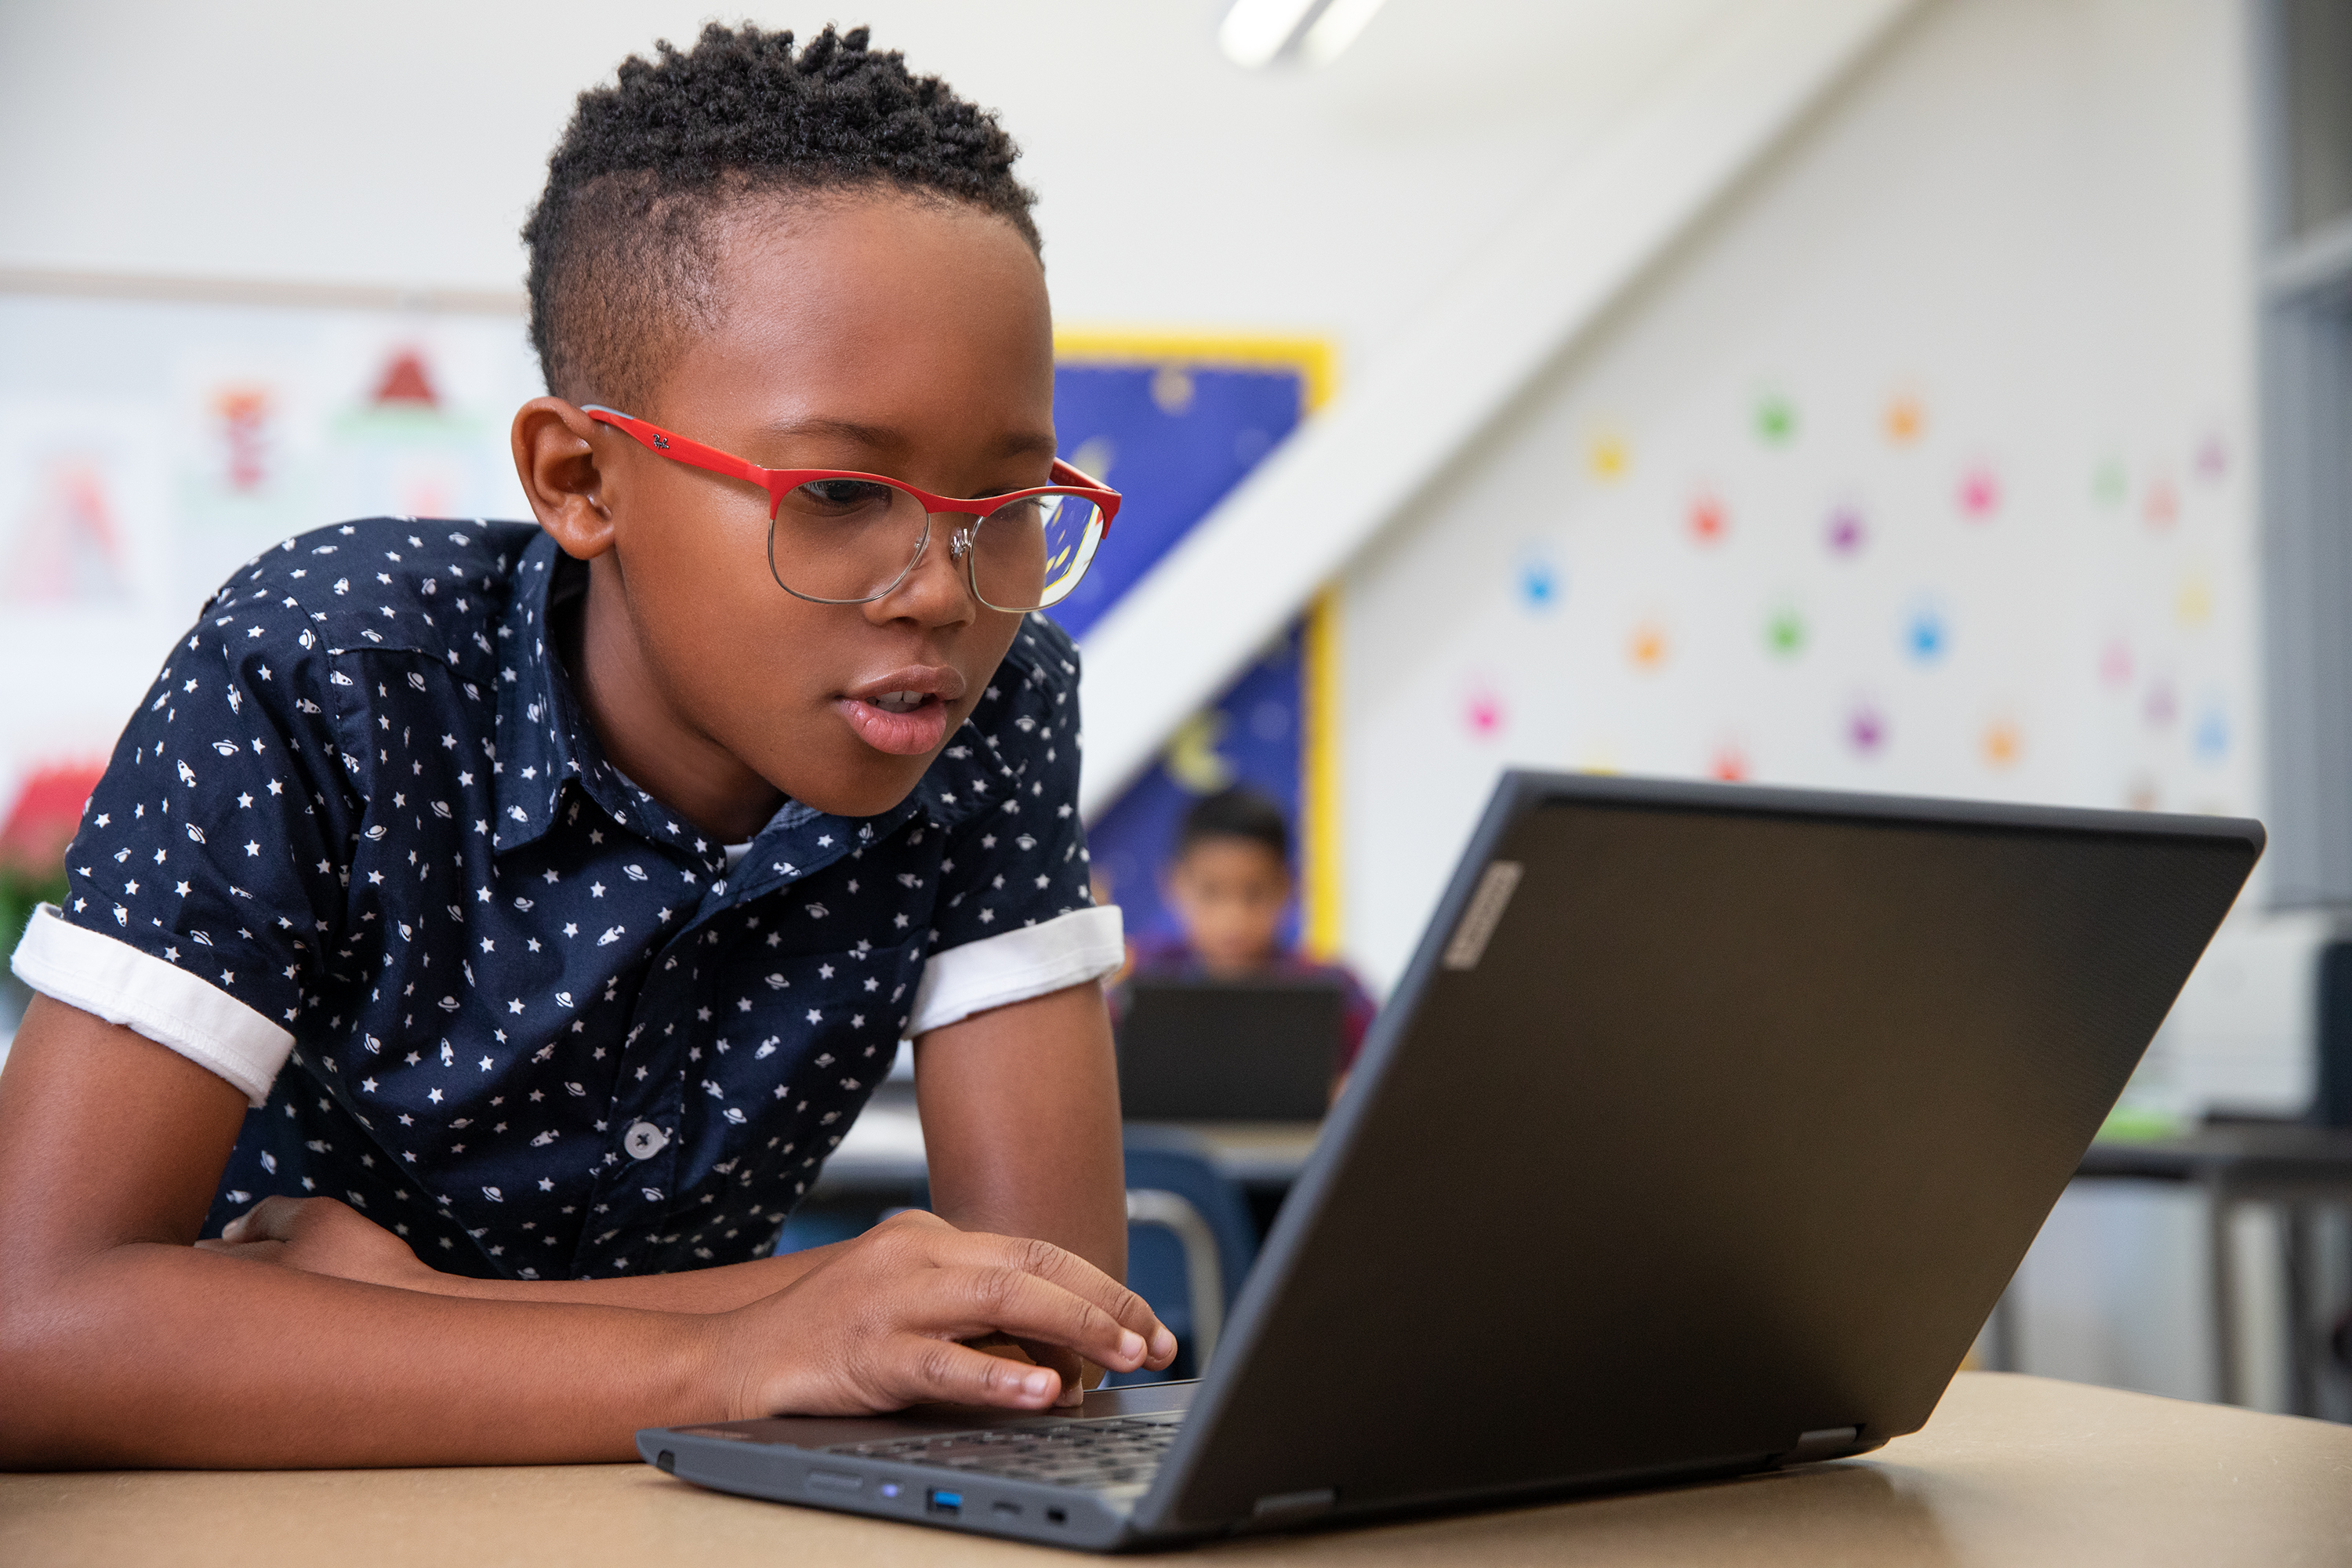 Why data and AI are the next step in education